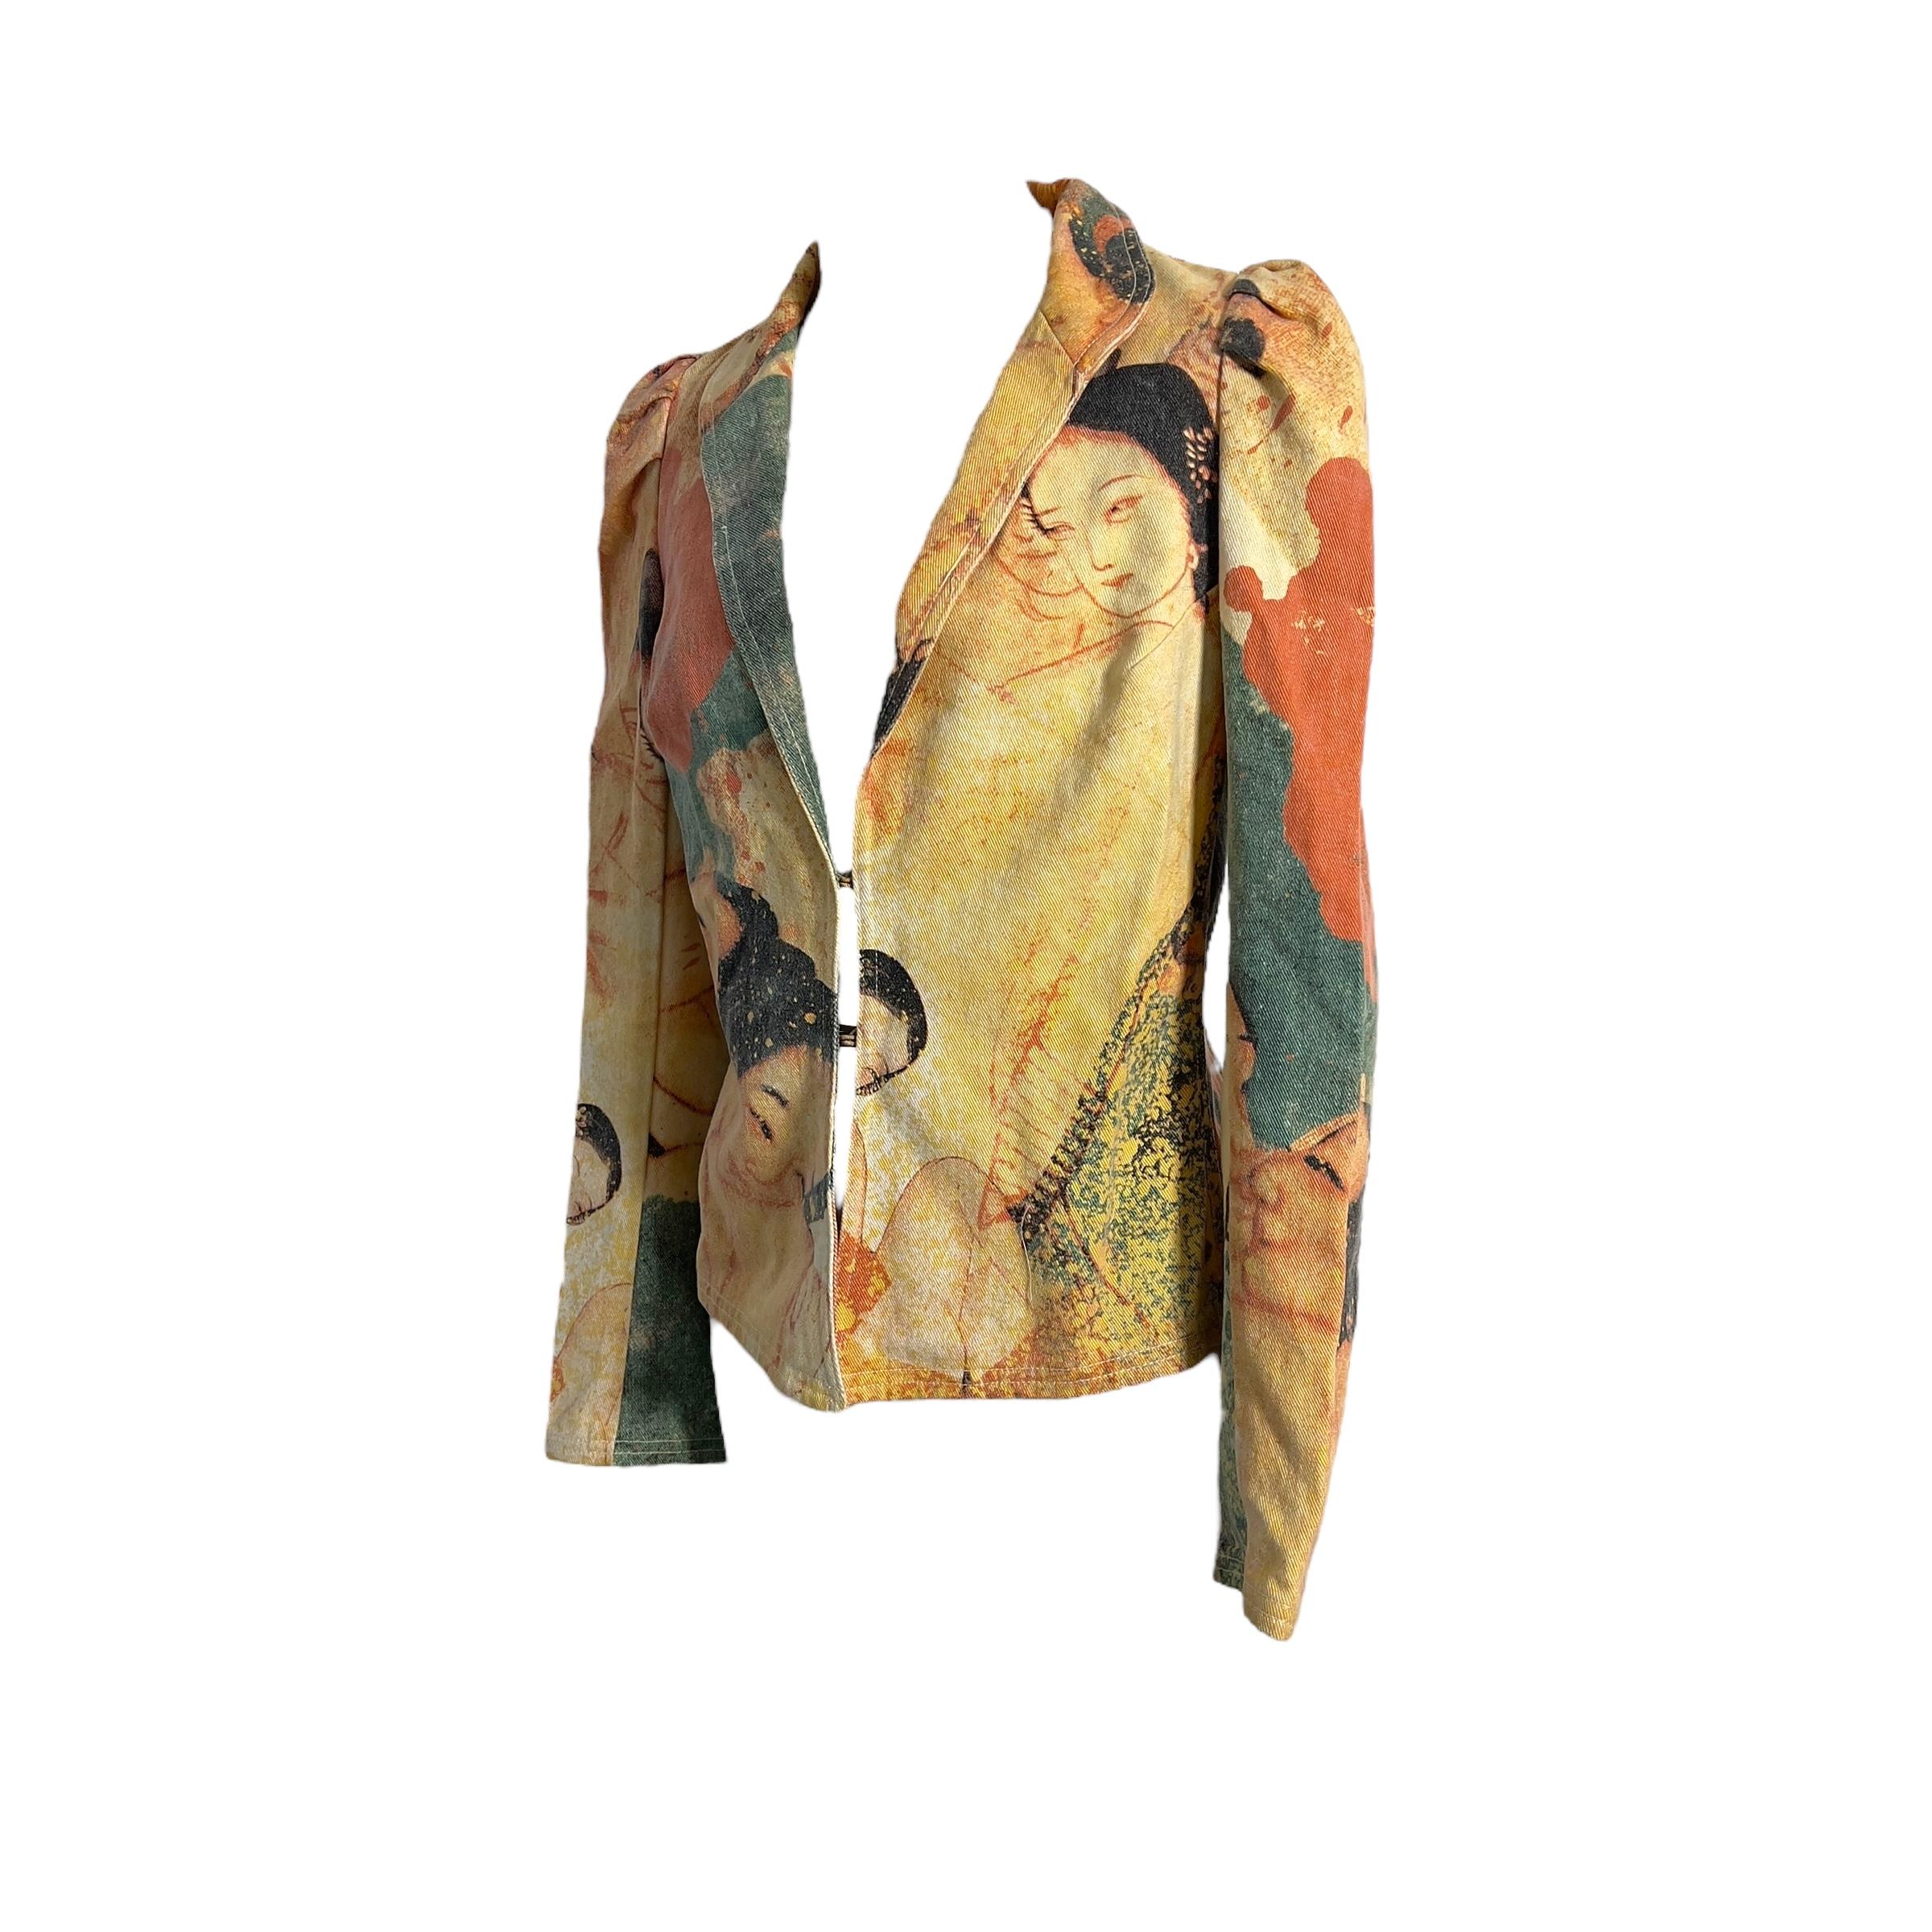 Rare printed blazer in size 1, circa S-M. Designed by known Chinese - American designer ‘Vivienne Tam’. Vivienne Tam is a renowned fashion designer known for her fusion of Eastern and Western influences. Her designs often feature intricate patterns,